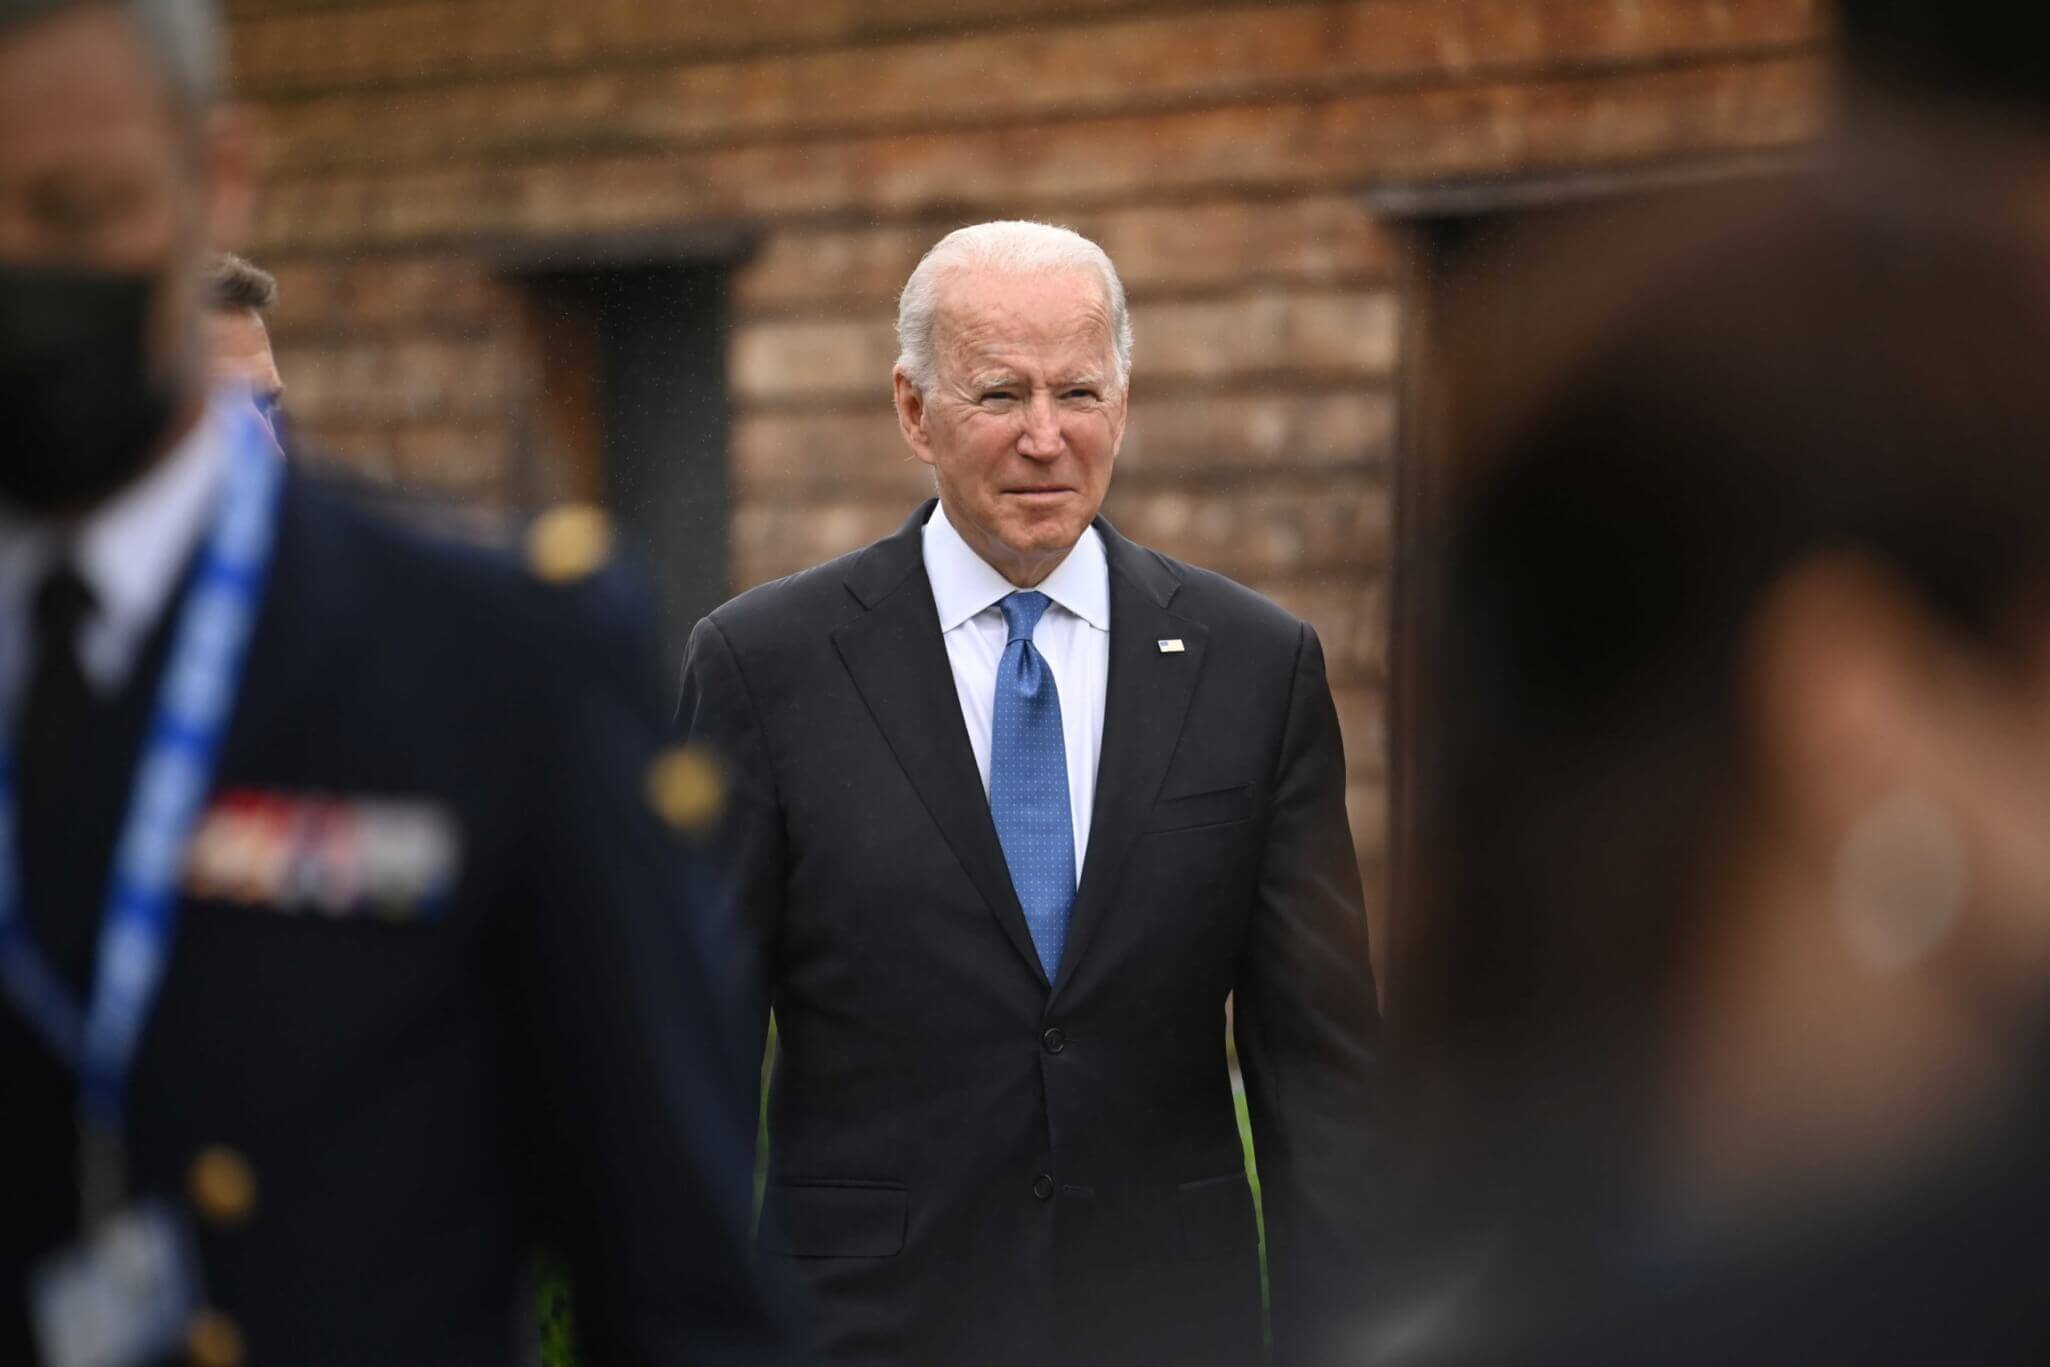 After meeting with Putin, Biden will hold a 